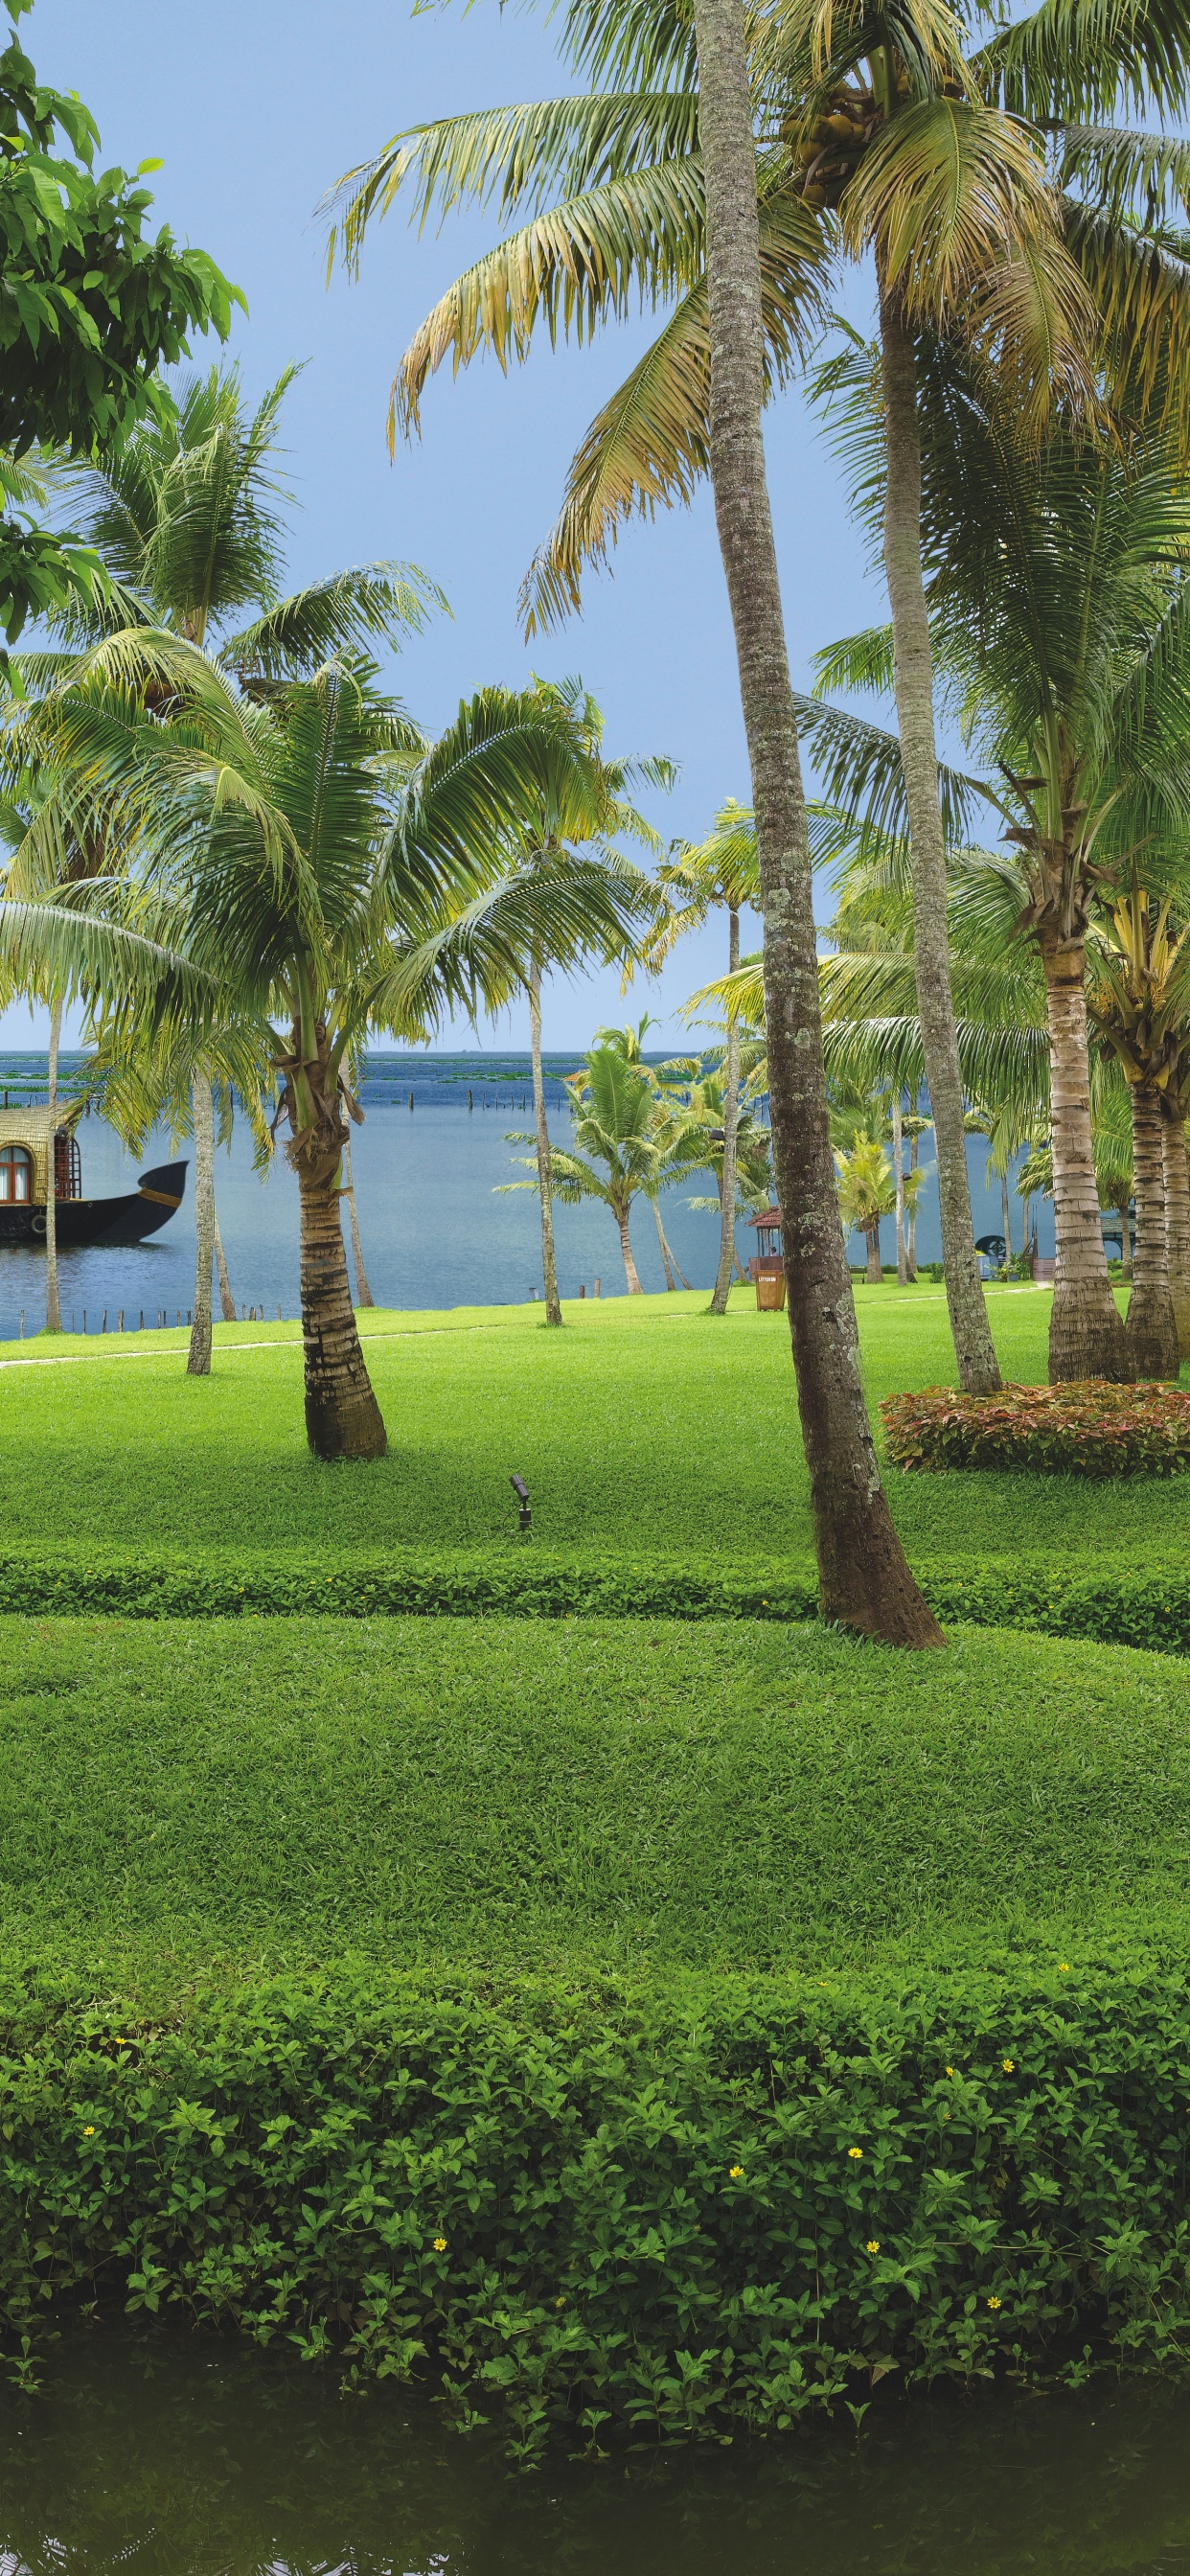 Green Palm Trees Near Body of Water During Daytime. Wallpaper in 1242x2688 Resolution